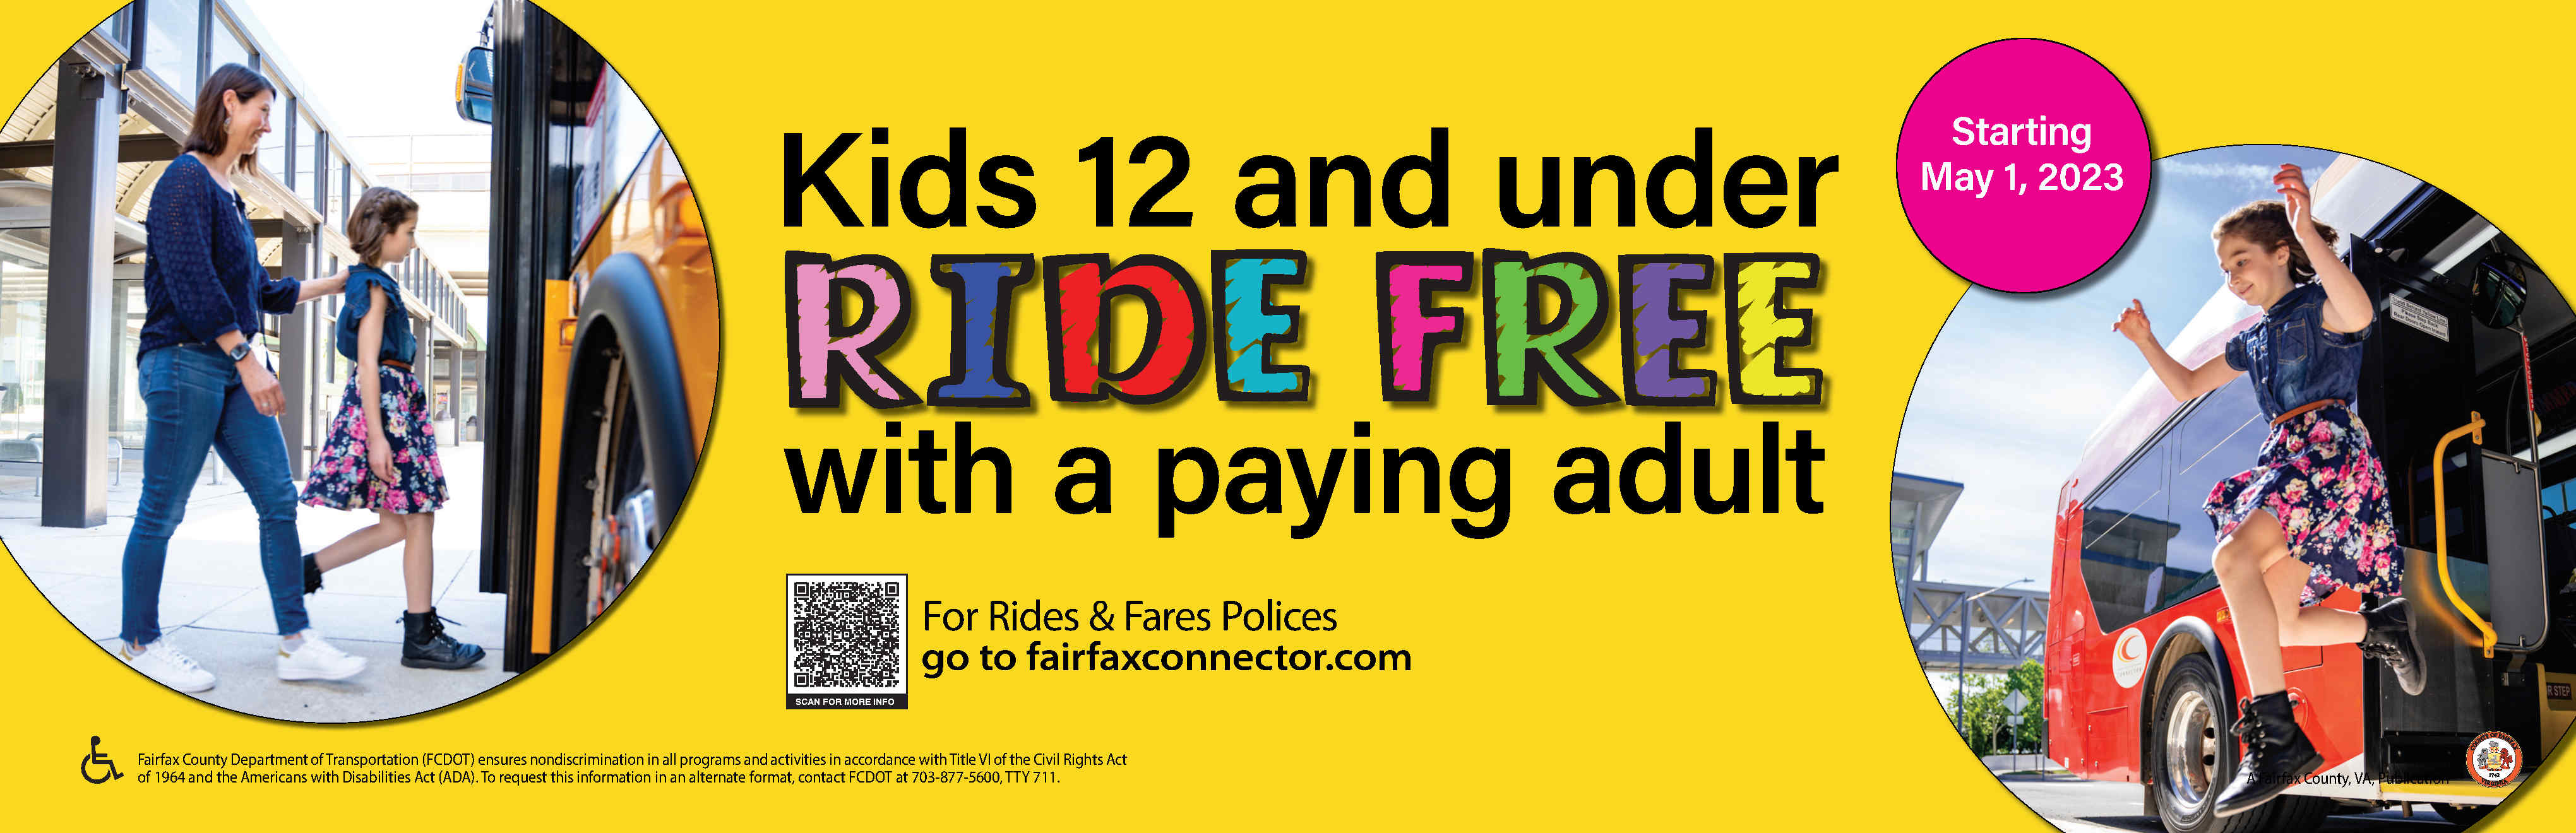 Youth Fare Policy Change